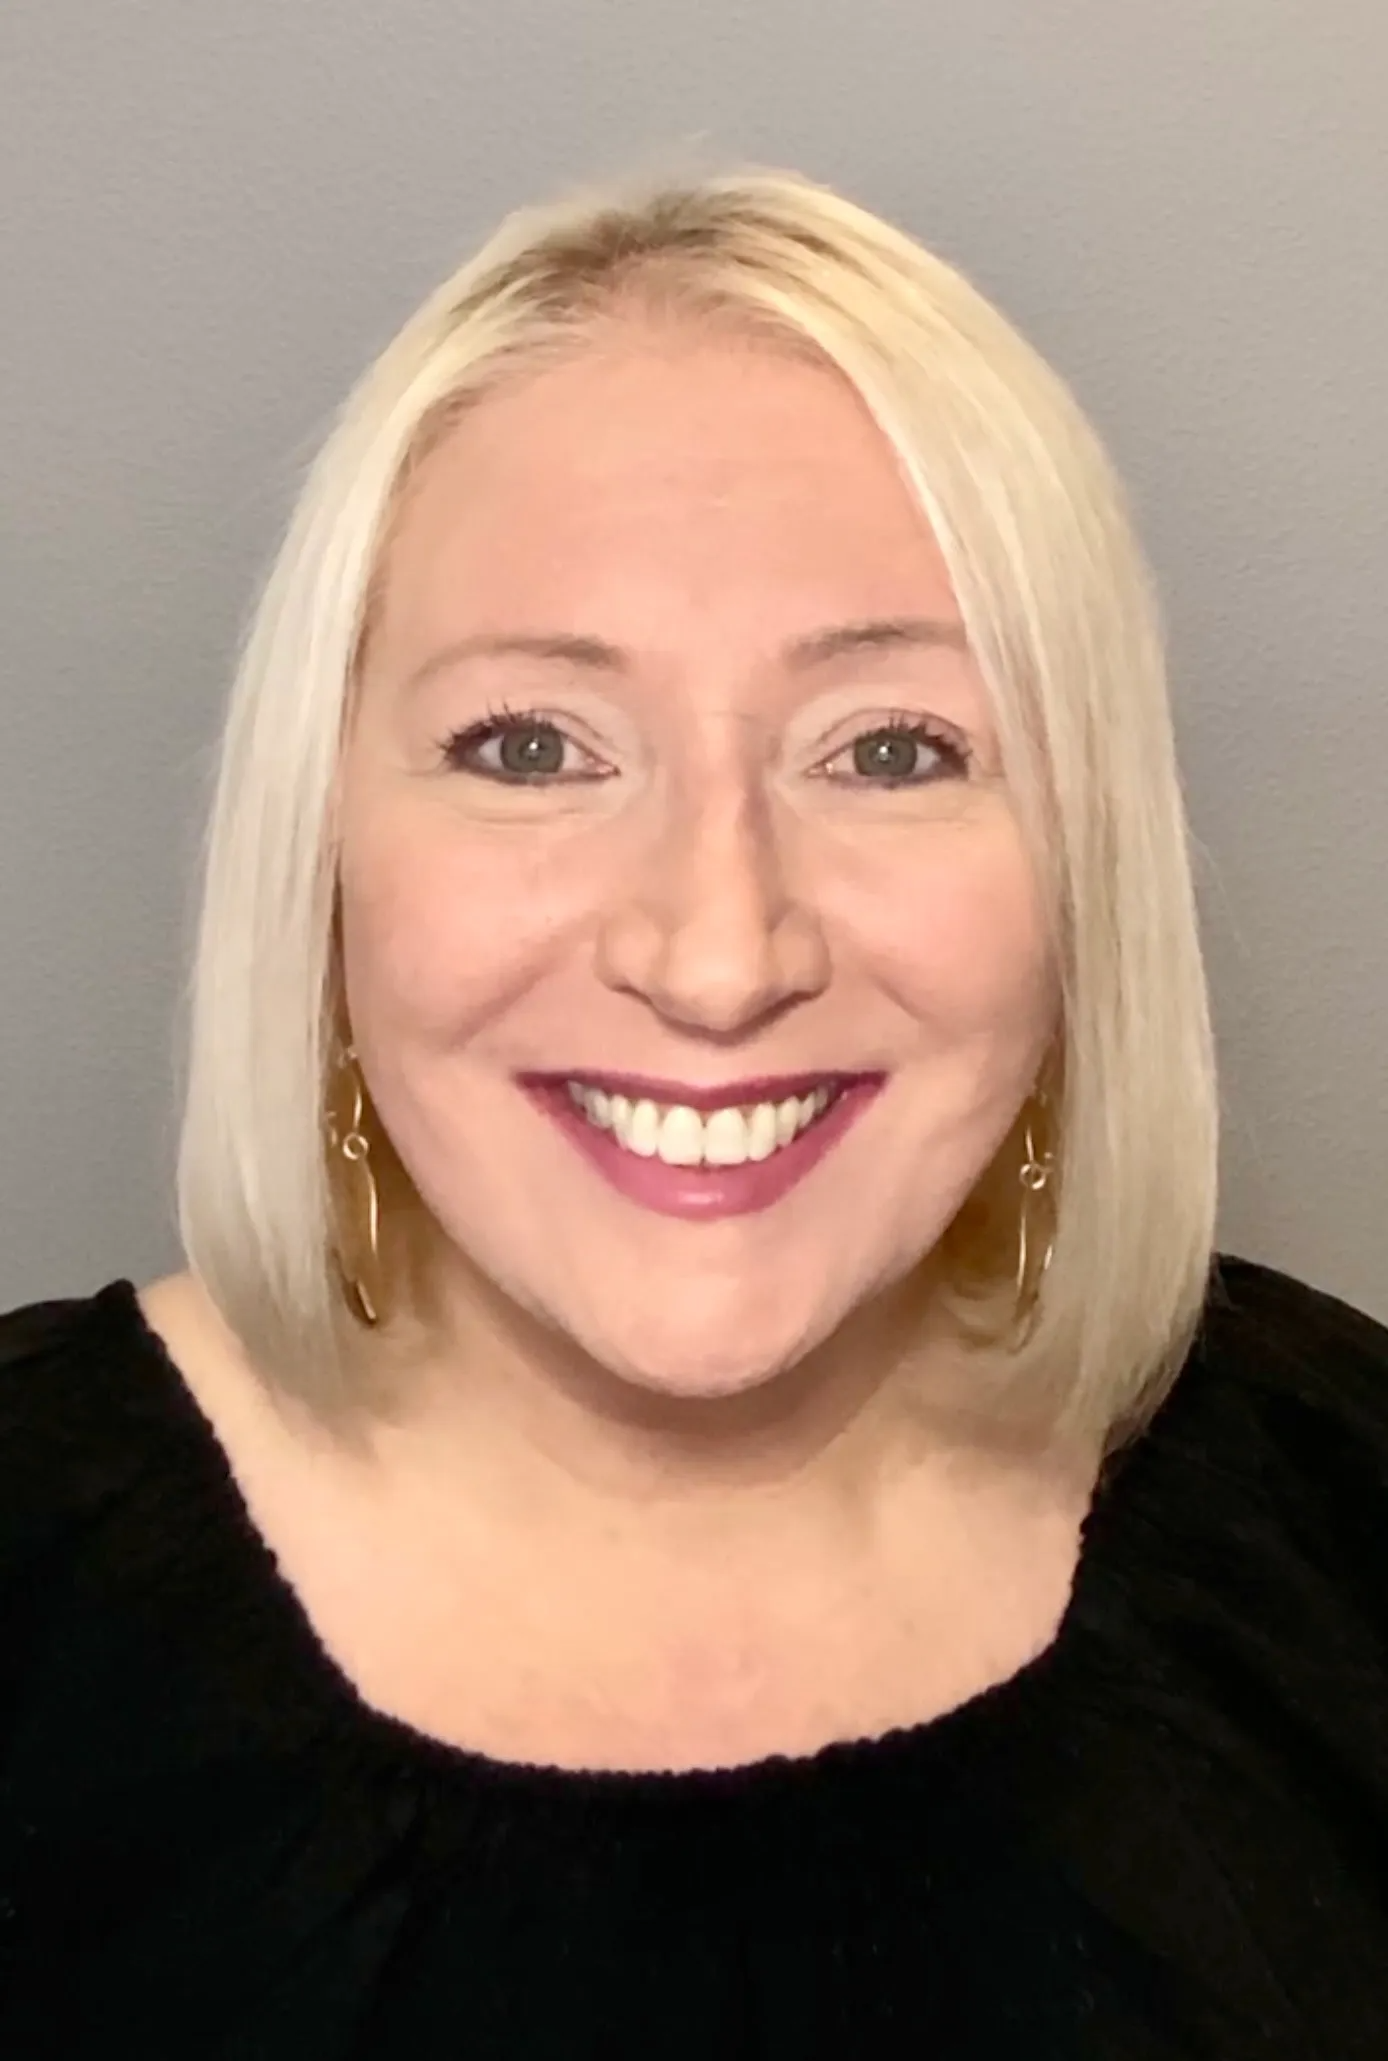 A woman with blonde hair and earrings is smiling for the camera.